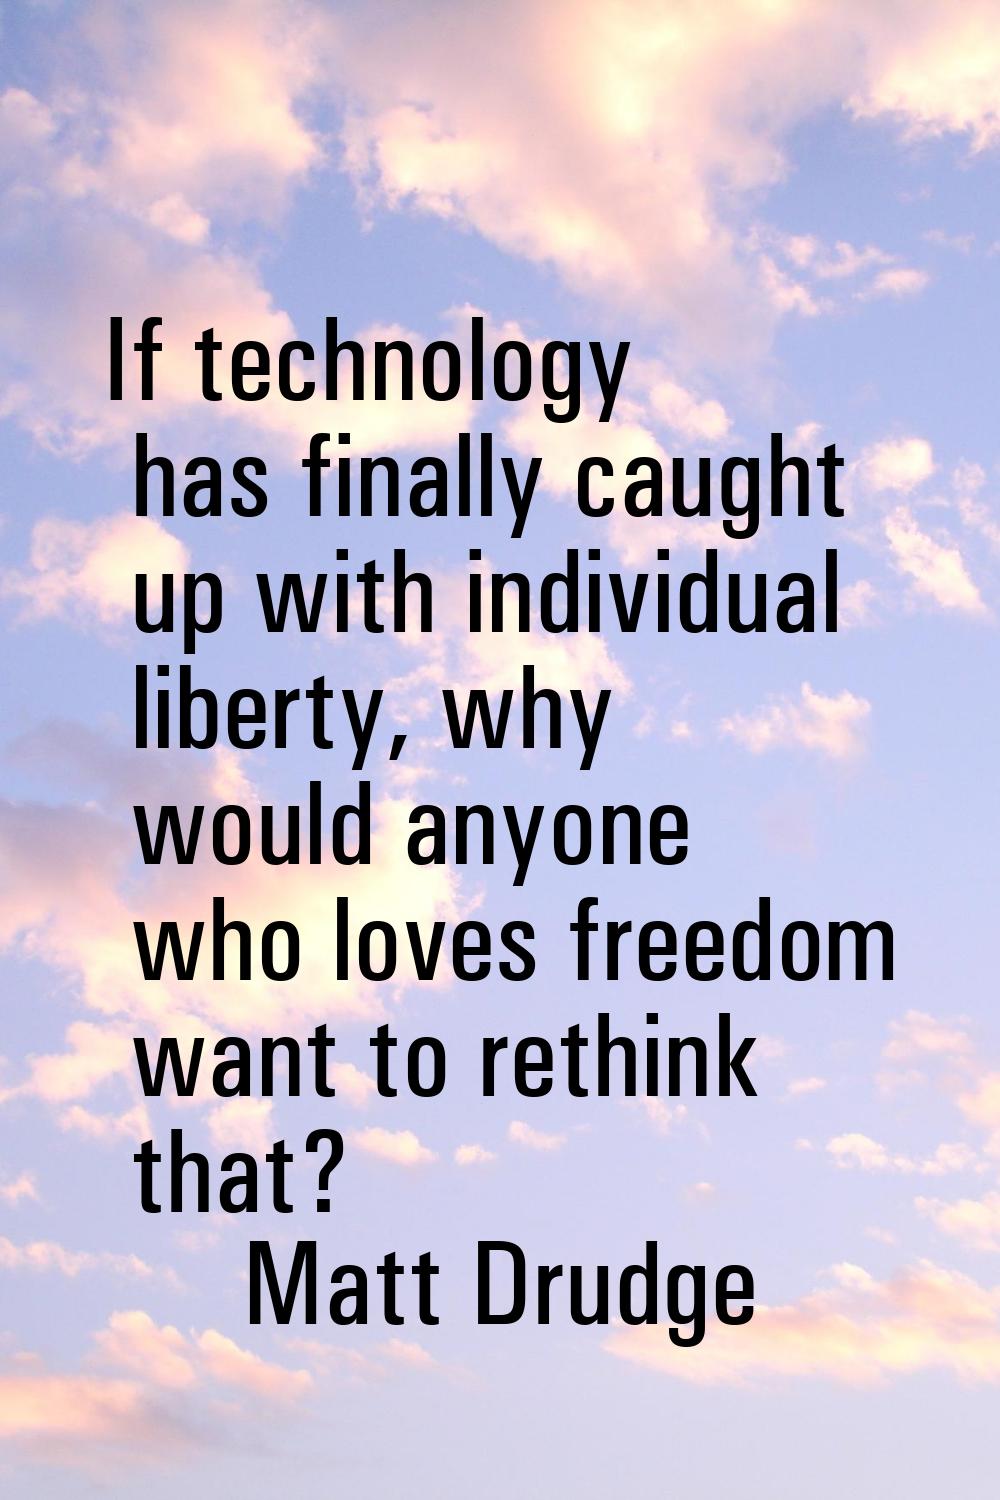 If technology has finally caught up with individual liberty, why would anyone who loves freedom wan